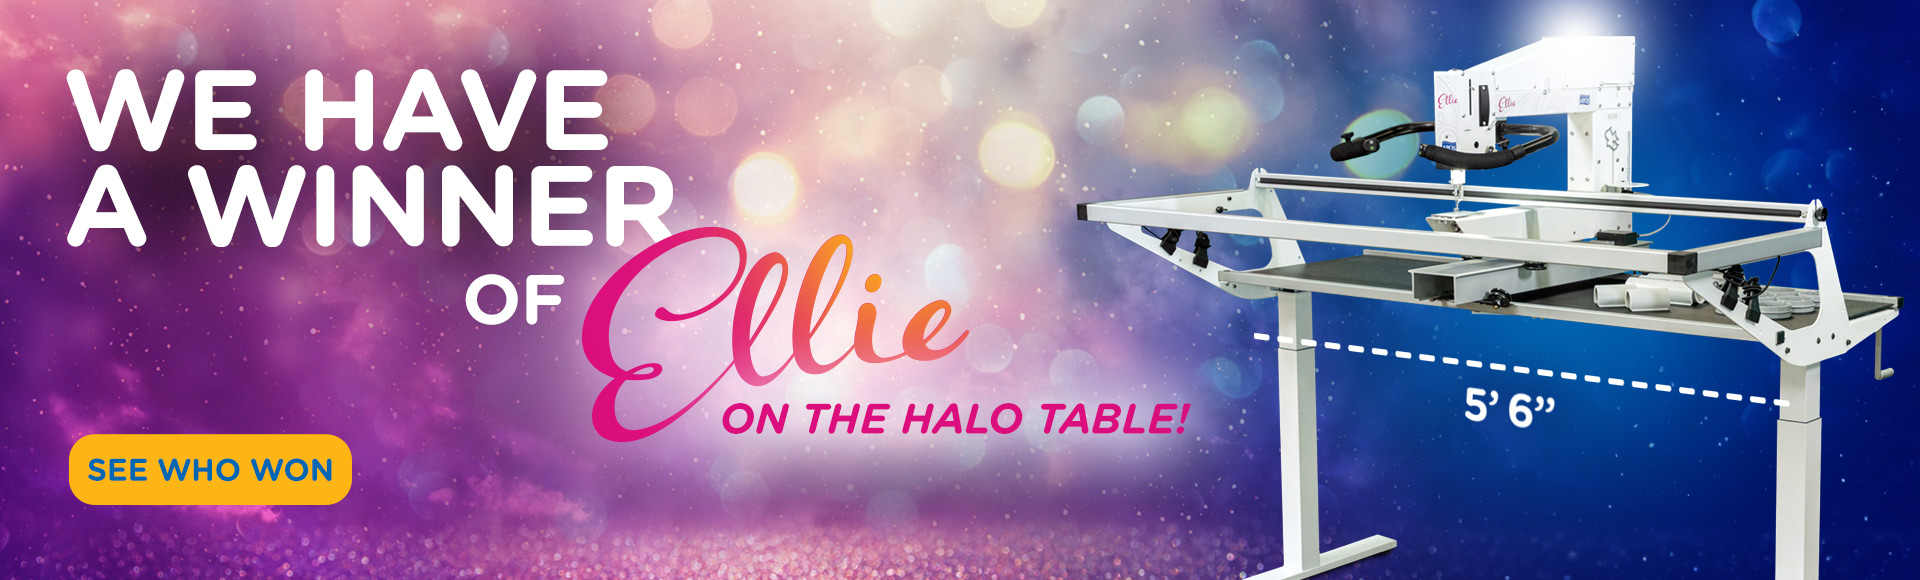 Ellie on a Halo Table